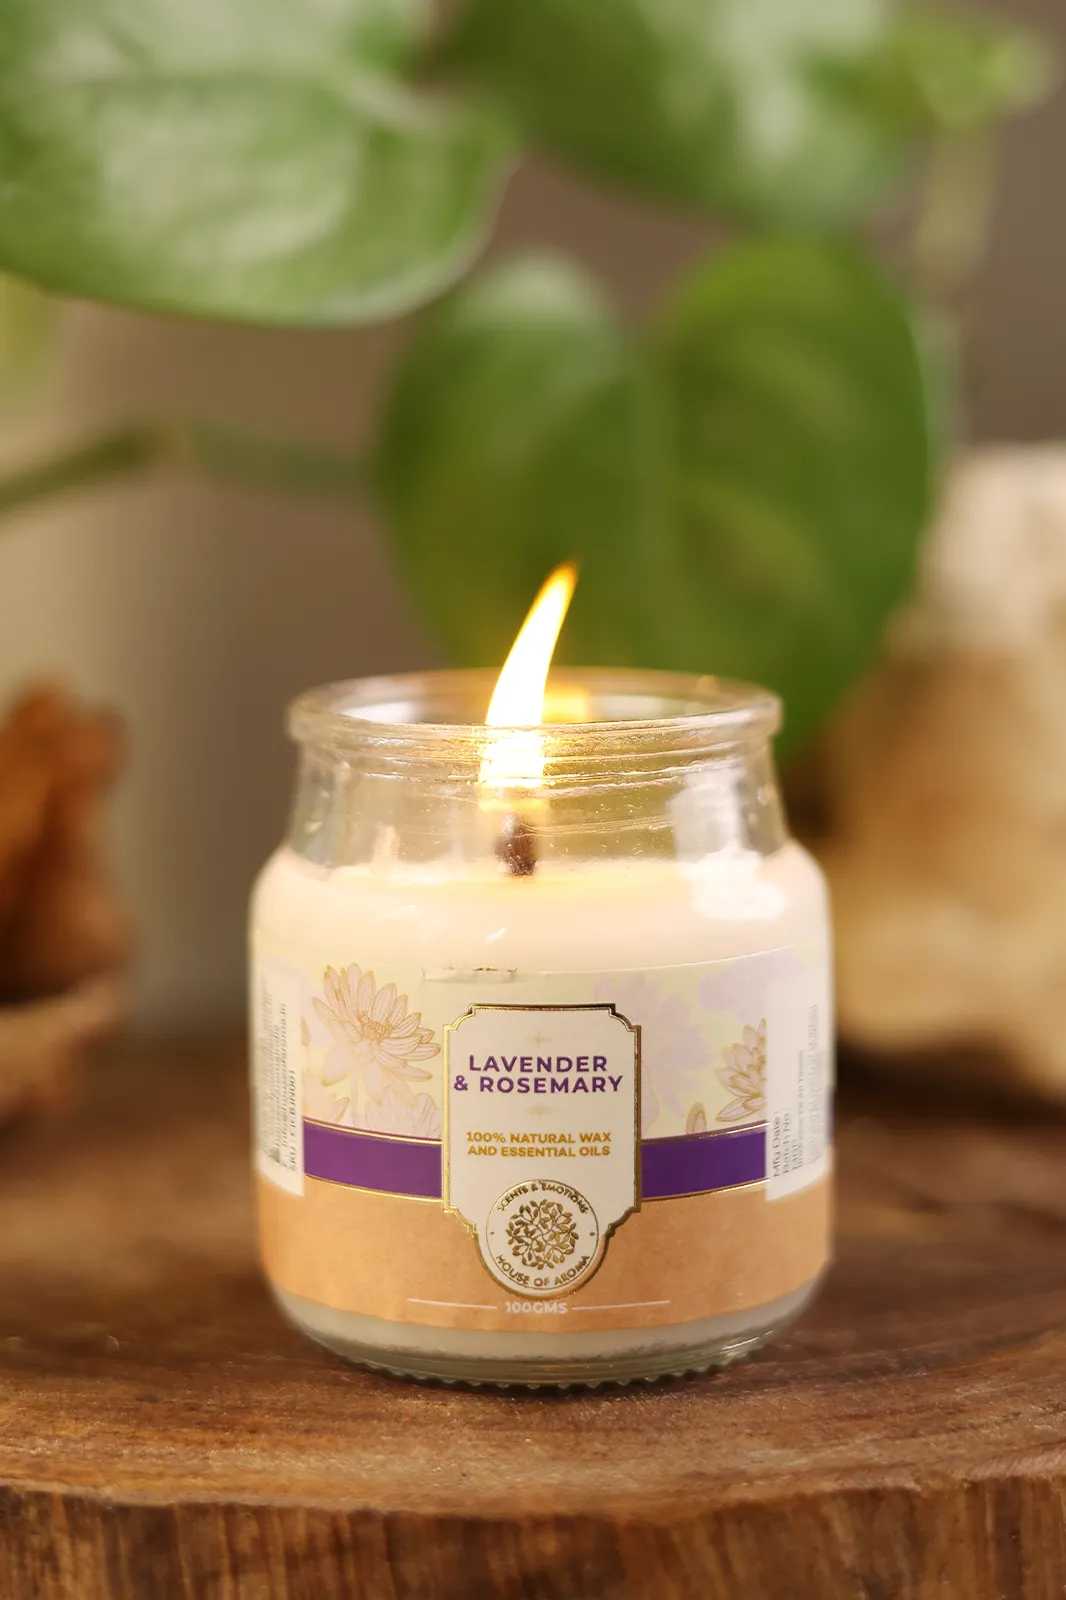 Lavender and Rosemary Natural Scented Candle, Rosemary natural scented candles, Lavender natural scented candles, best luxury fresh candle, candles online, HOA